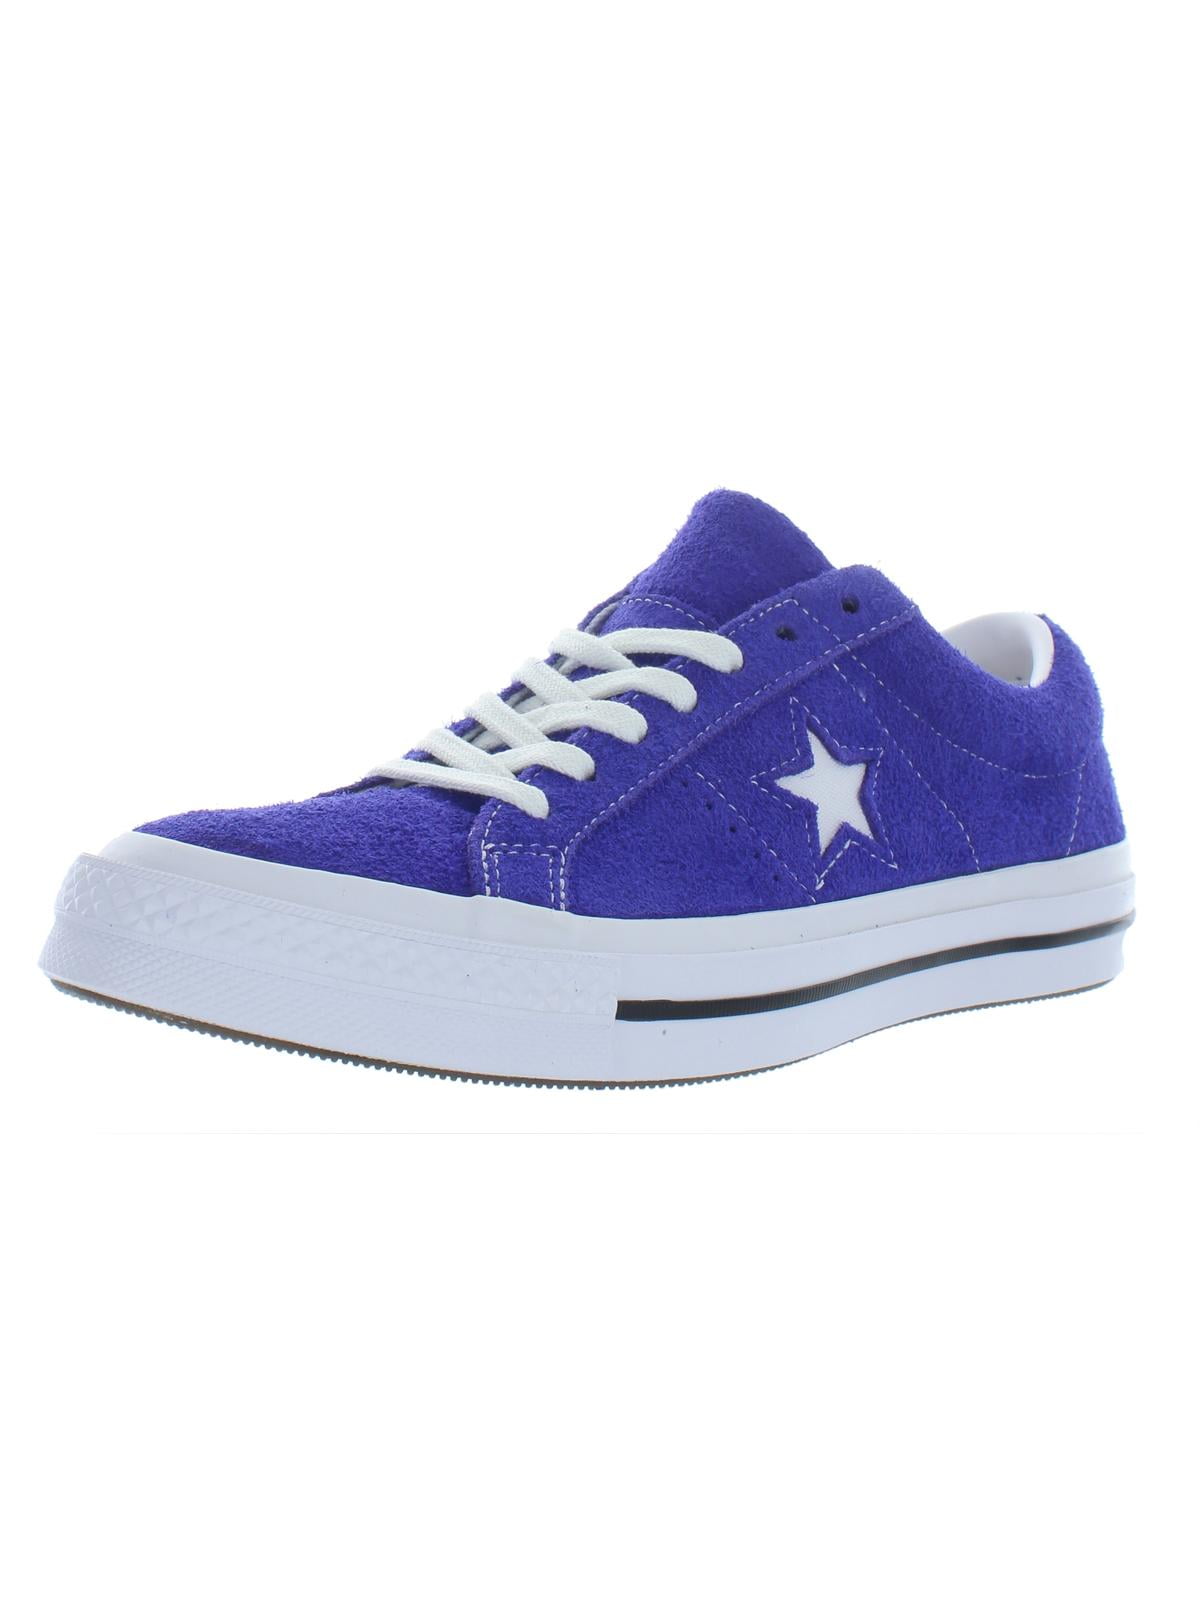 converse one star suede womens